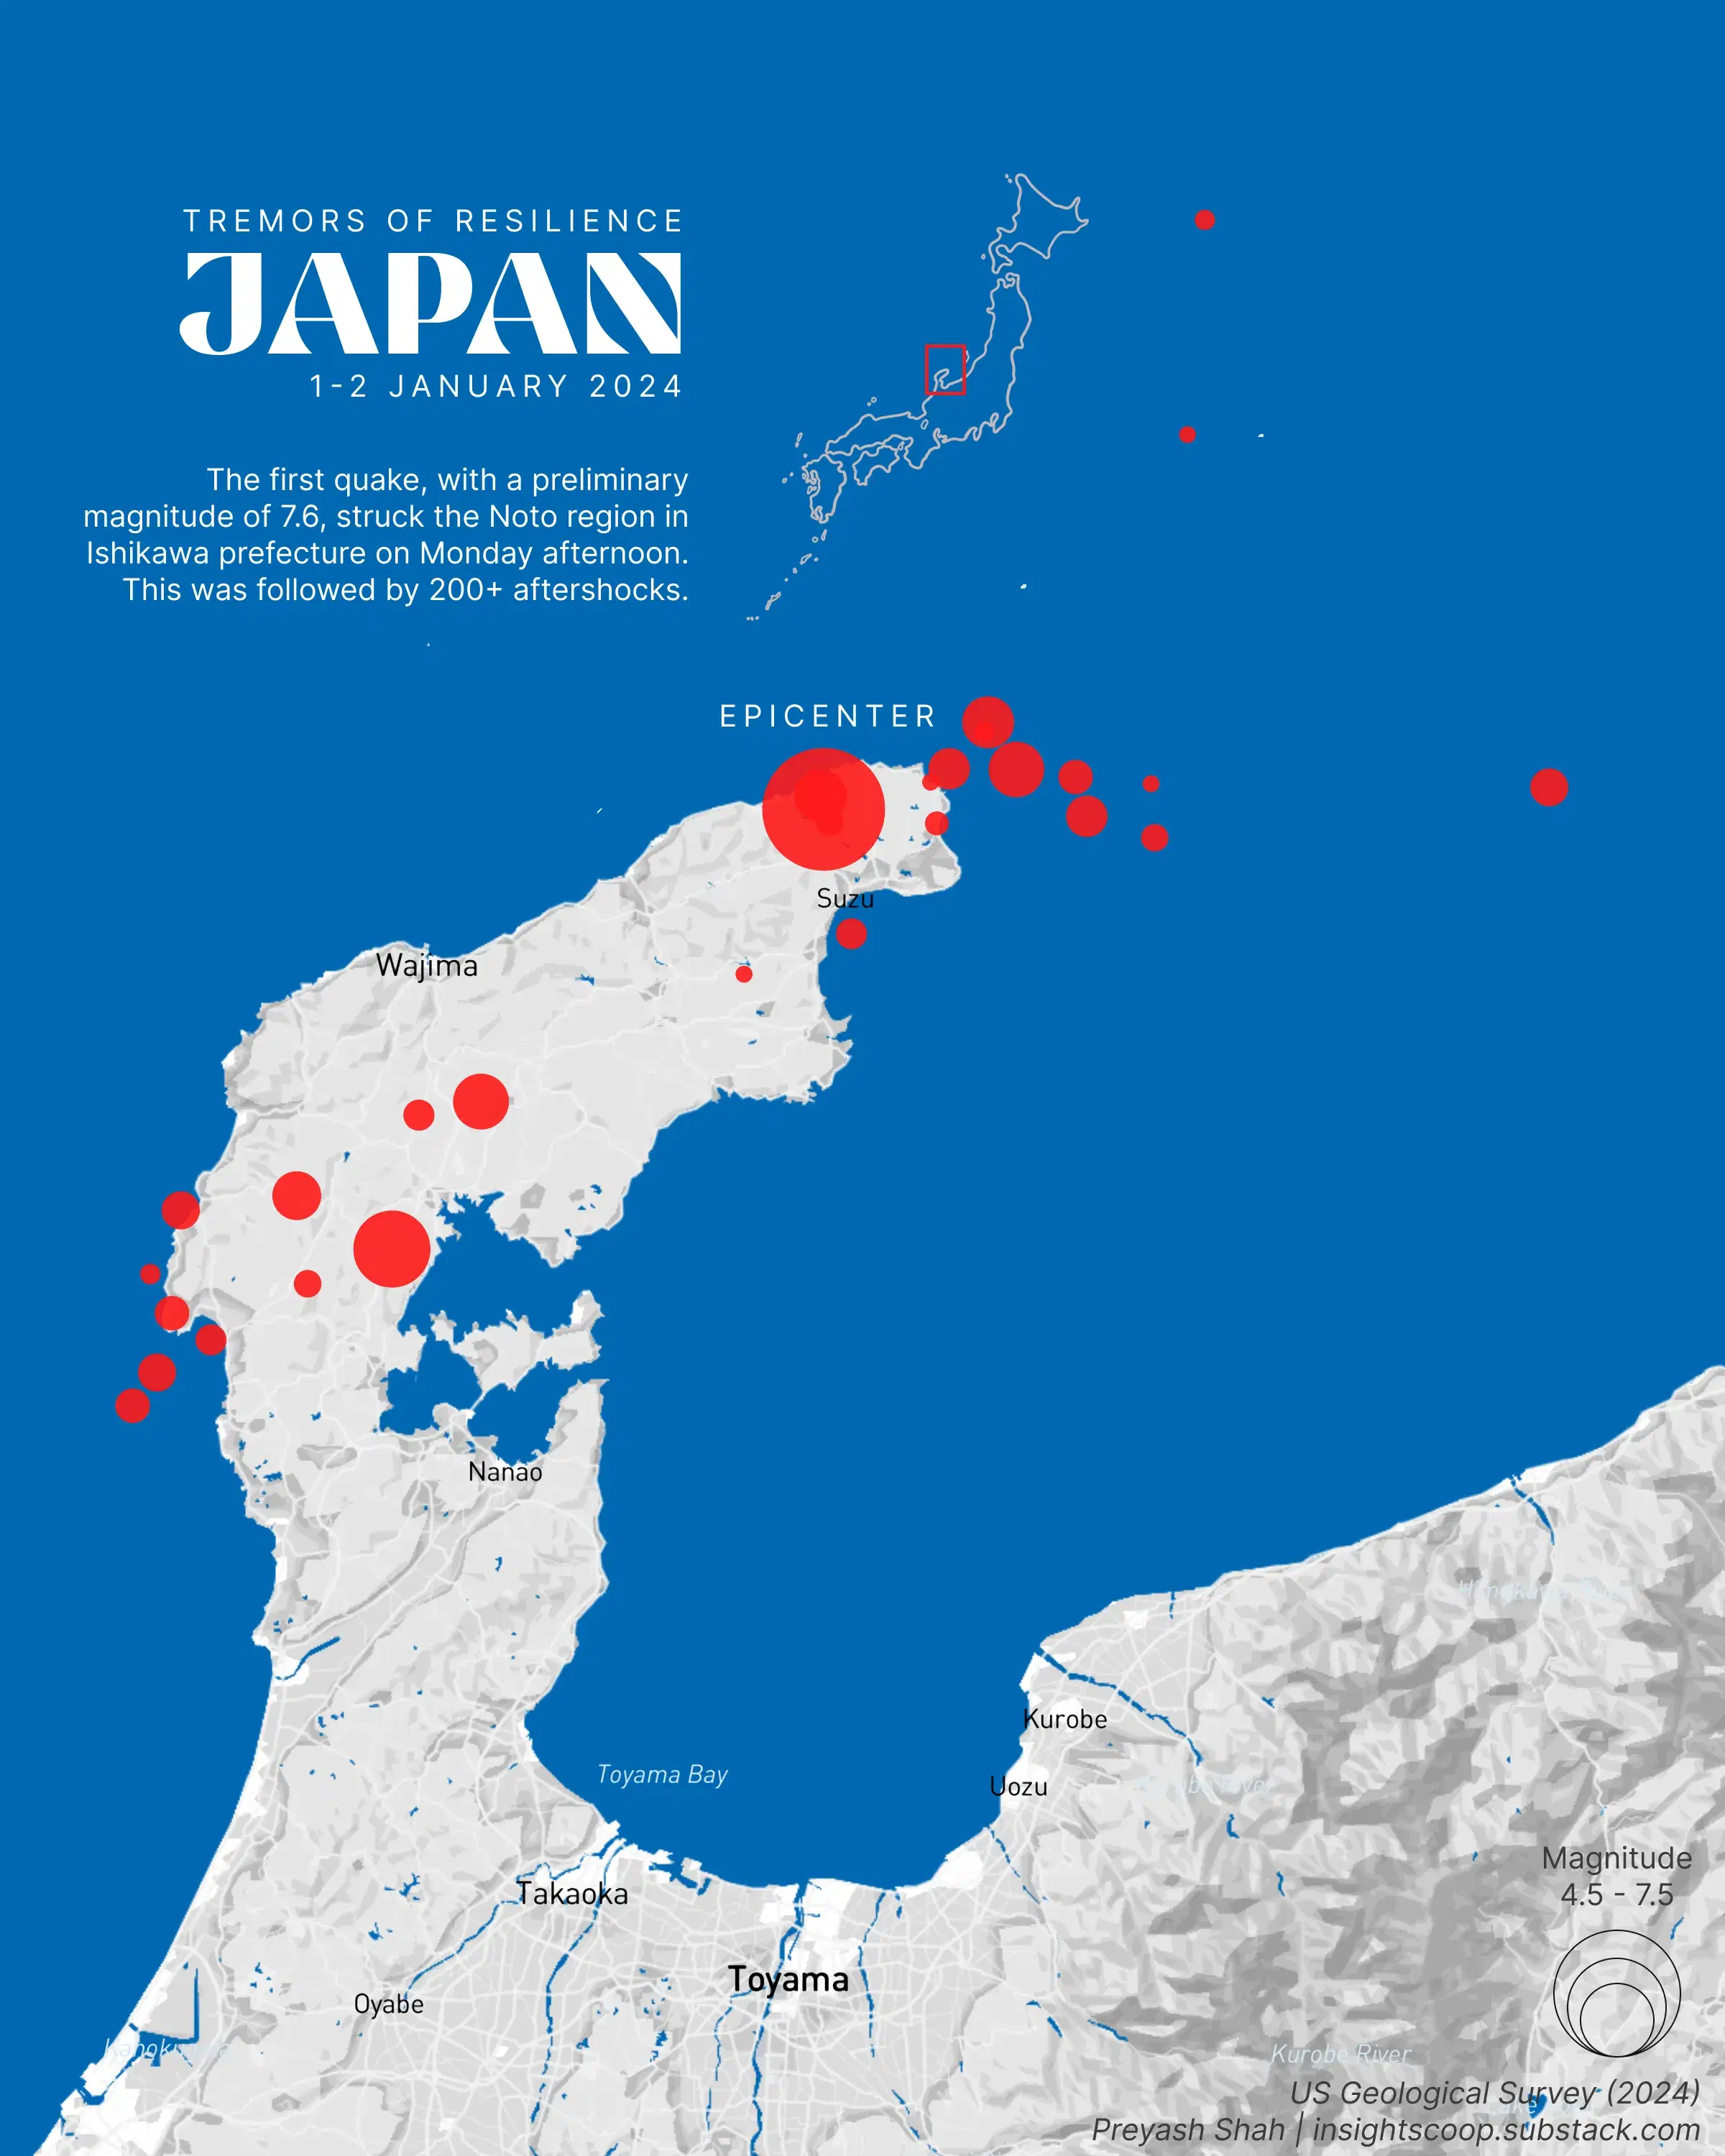 Tremors of Resilience: Japan